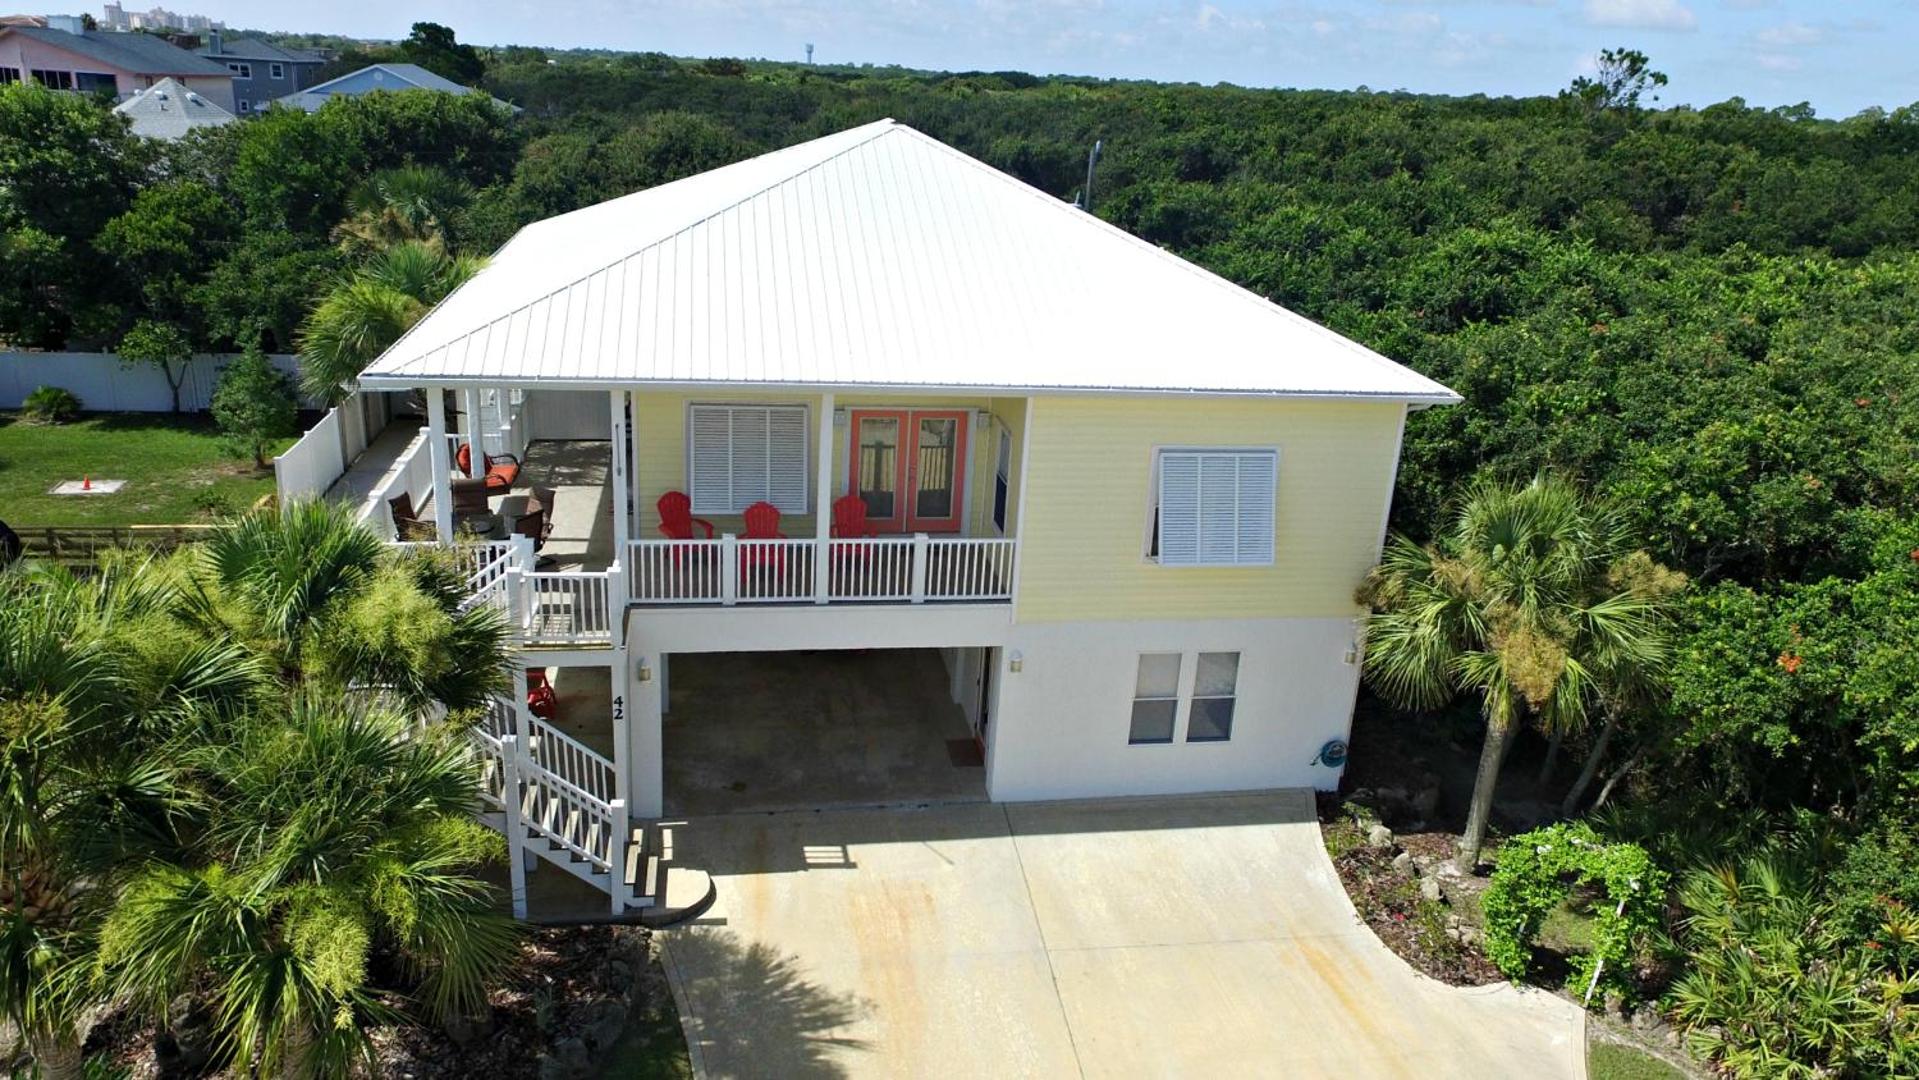 Fantasea is the Perfect Beach House with Pool and Hot Tub 4 bed3 bath with 2 Master Suites